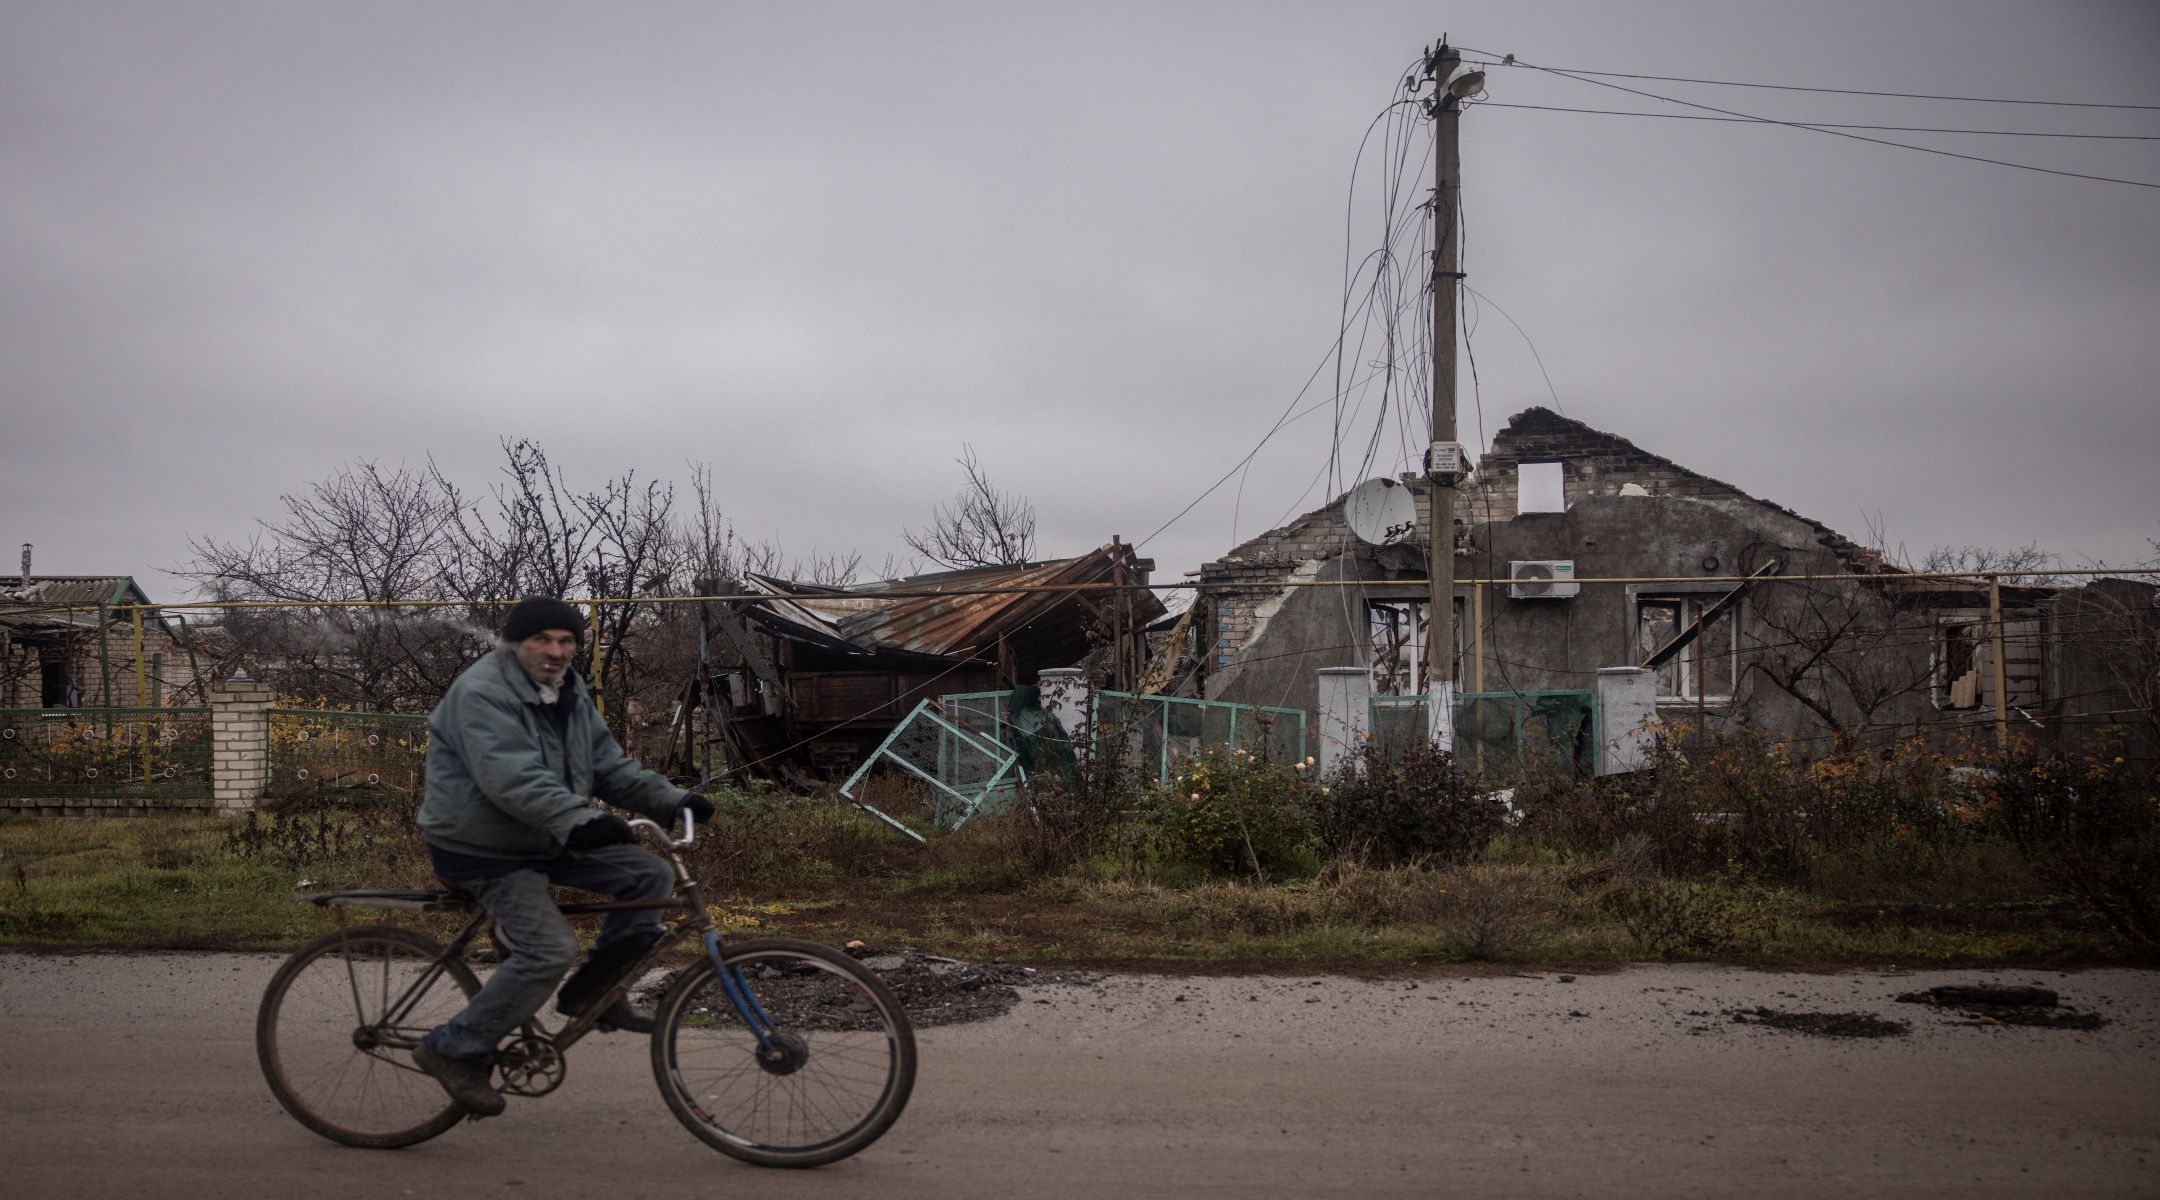 A man rides a bike past a destroyed house in the village of Posad Pokrovske on the outskirts of Kherson on November 30, 2022 in Kherson, Ukraine. Recently Ukrainian forces took back control of Kherson, as well as swaths of its surrounding region, after Russia pulled its forces back to the other side of the Dnipro river. Kherson was the only regional capital to be captured by Russia following its invasion on February 24. (Photo by Chris McGrath/Getty Images)